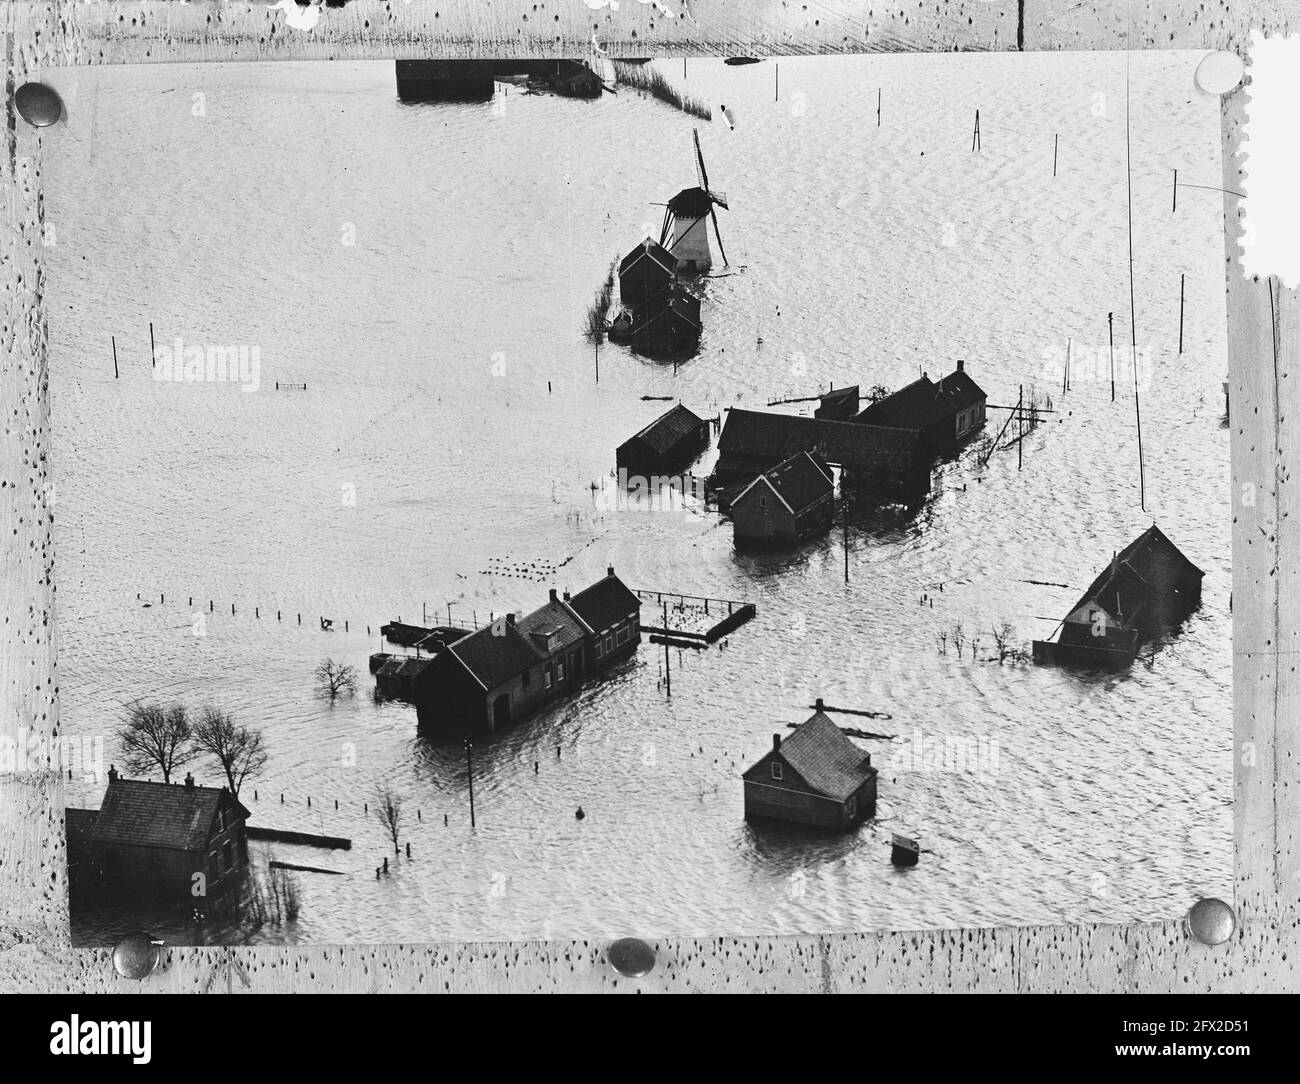 Aerial photograph. Schouwen-Duiveland, February 5, 1953, aerial photographs, floods, flooding, The Netherlands, 20th century press agency photo, news to remember, documentary, historic photography 1945-1990, visual stories, human history of the Twentieth Century, capturing moments in time Stock Photo